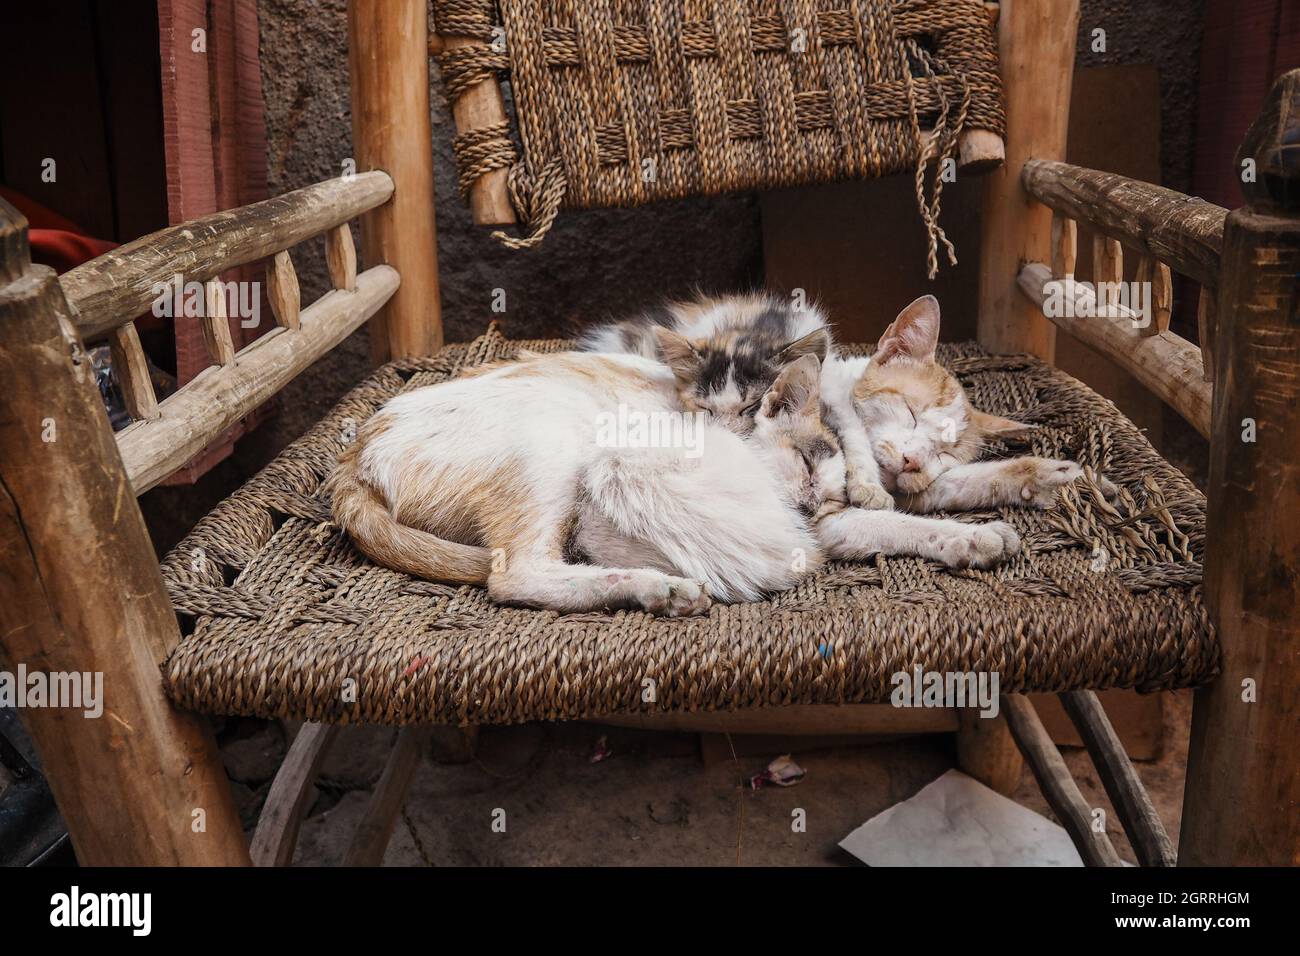 Three white stray cats resting on wicker chair cuddle together Stock Photo